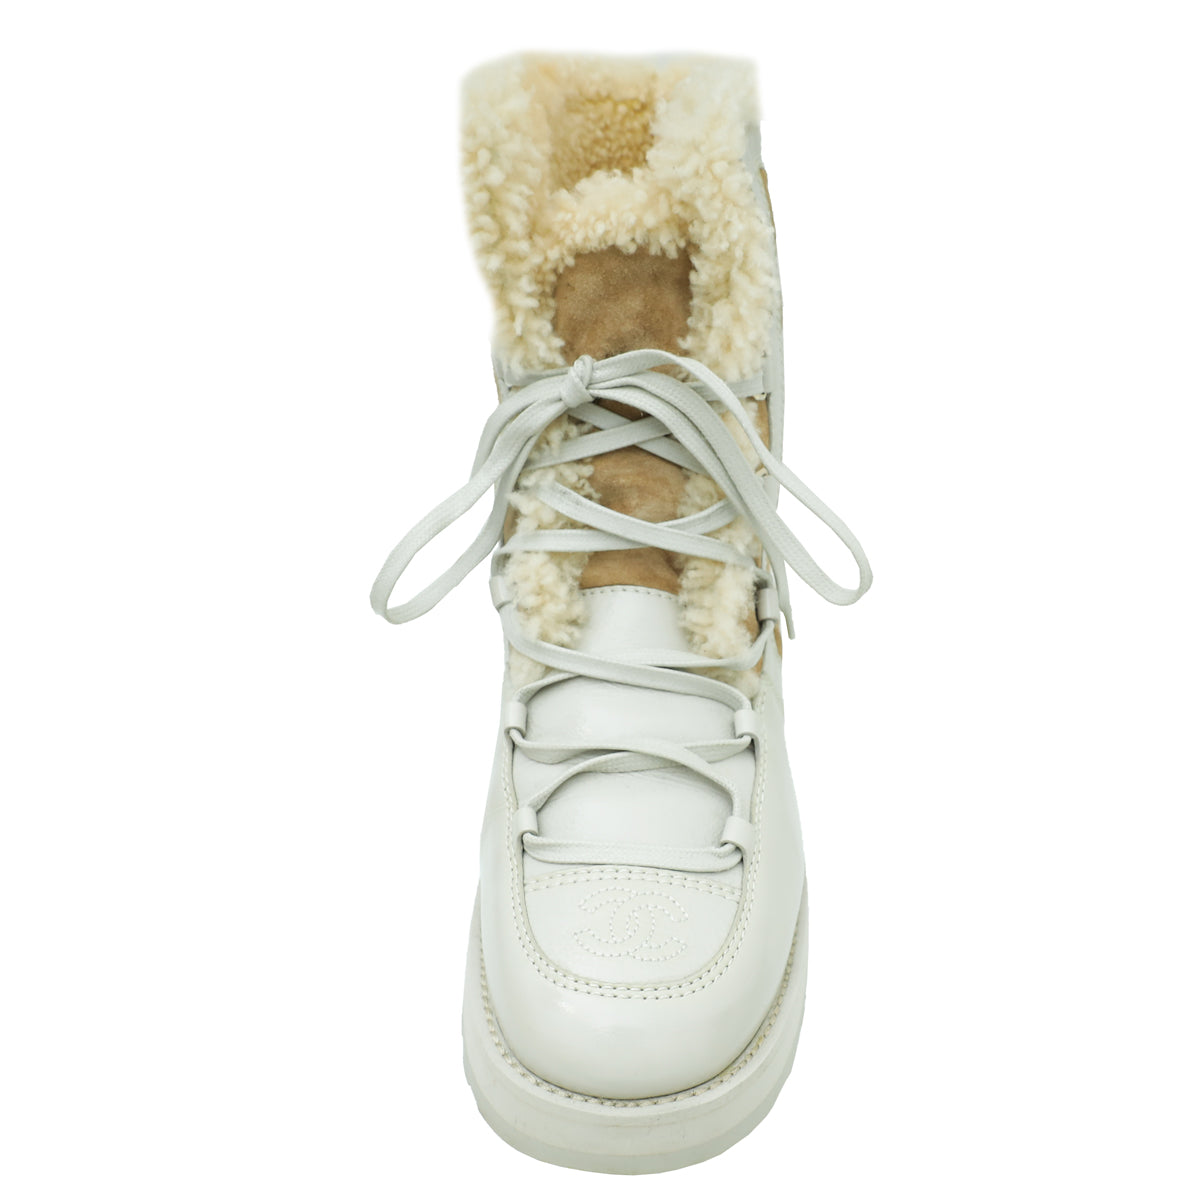 Chanel Bicolor CC Shearling Fur on Inside Lace Up Ankle Boot 39